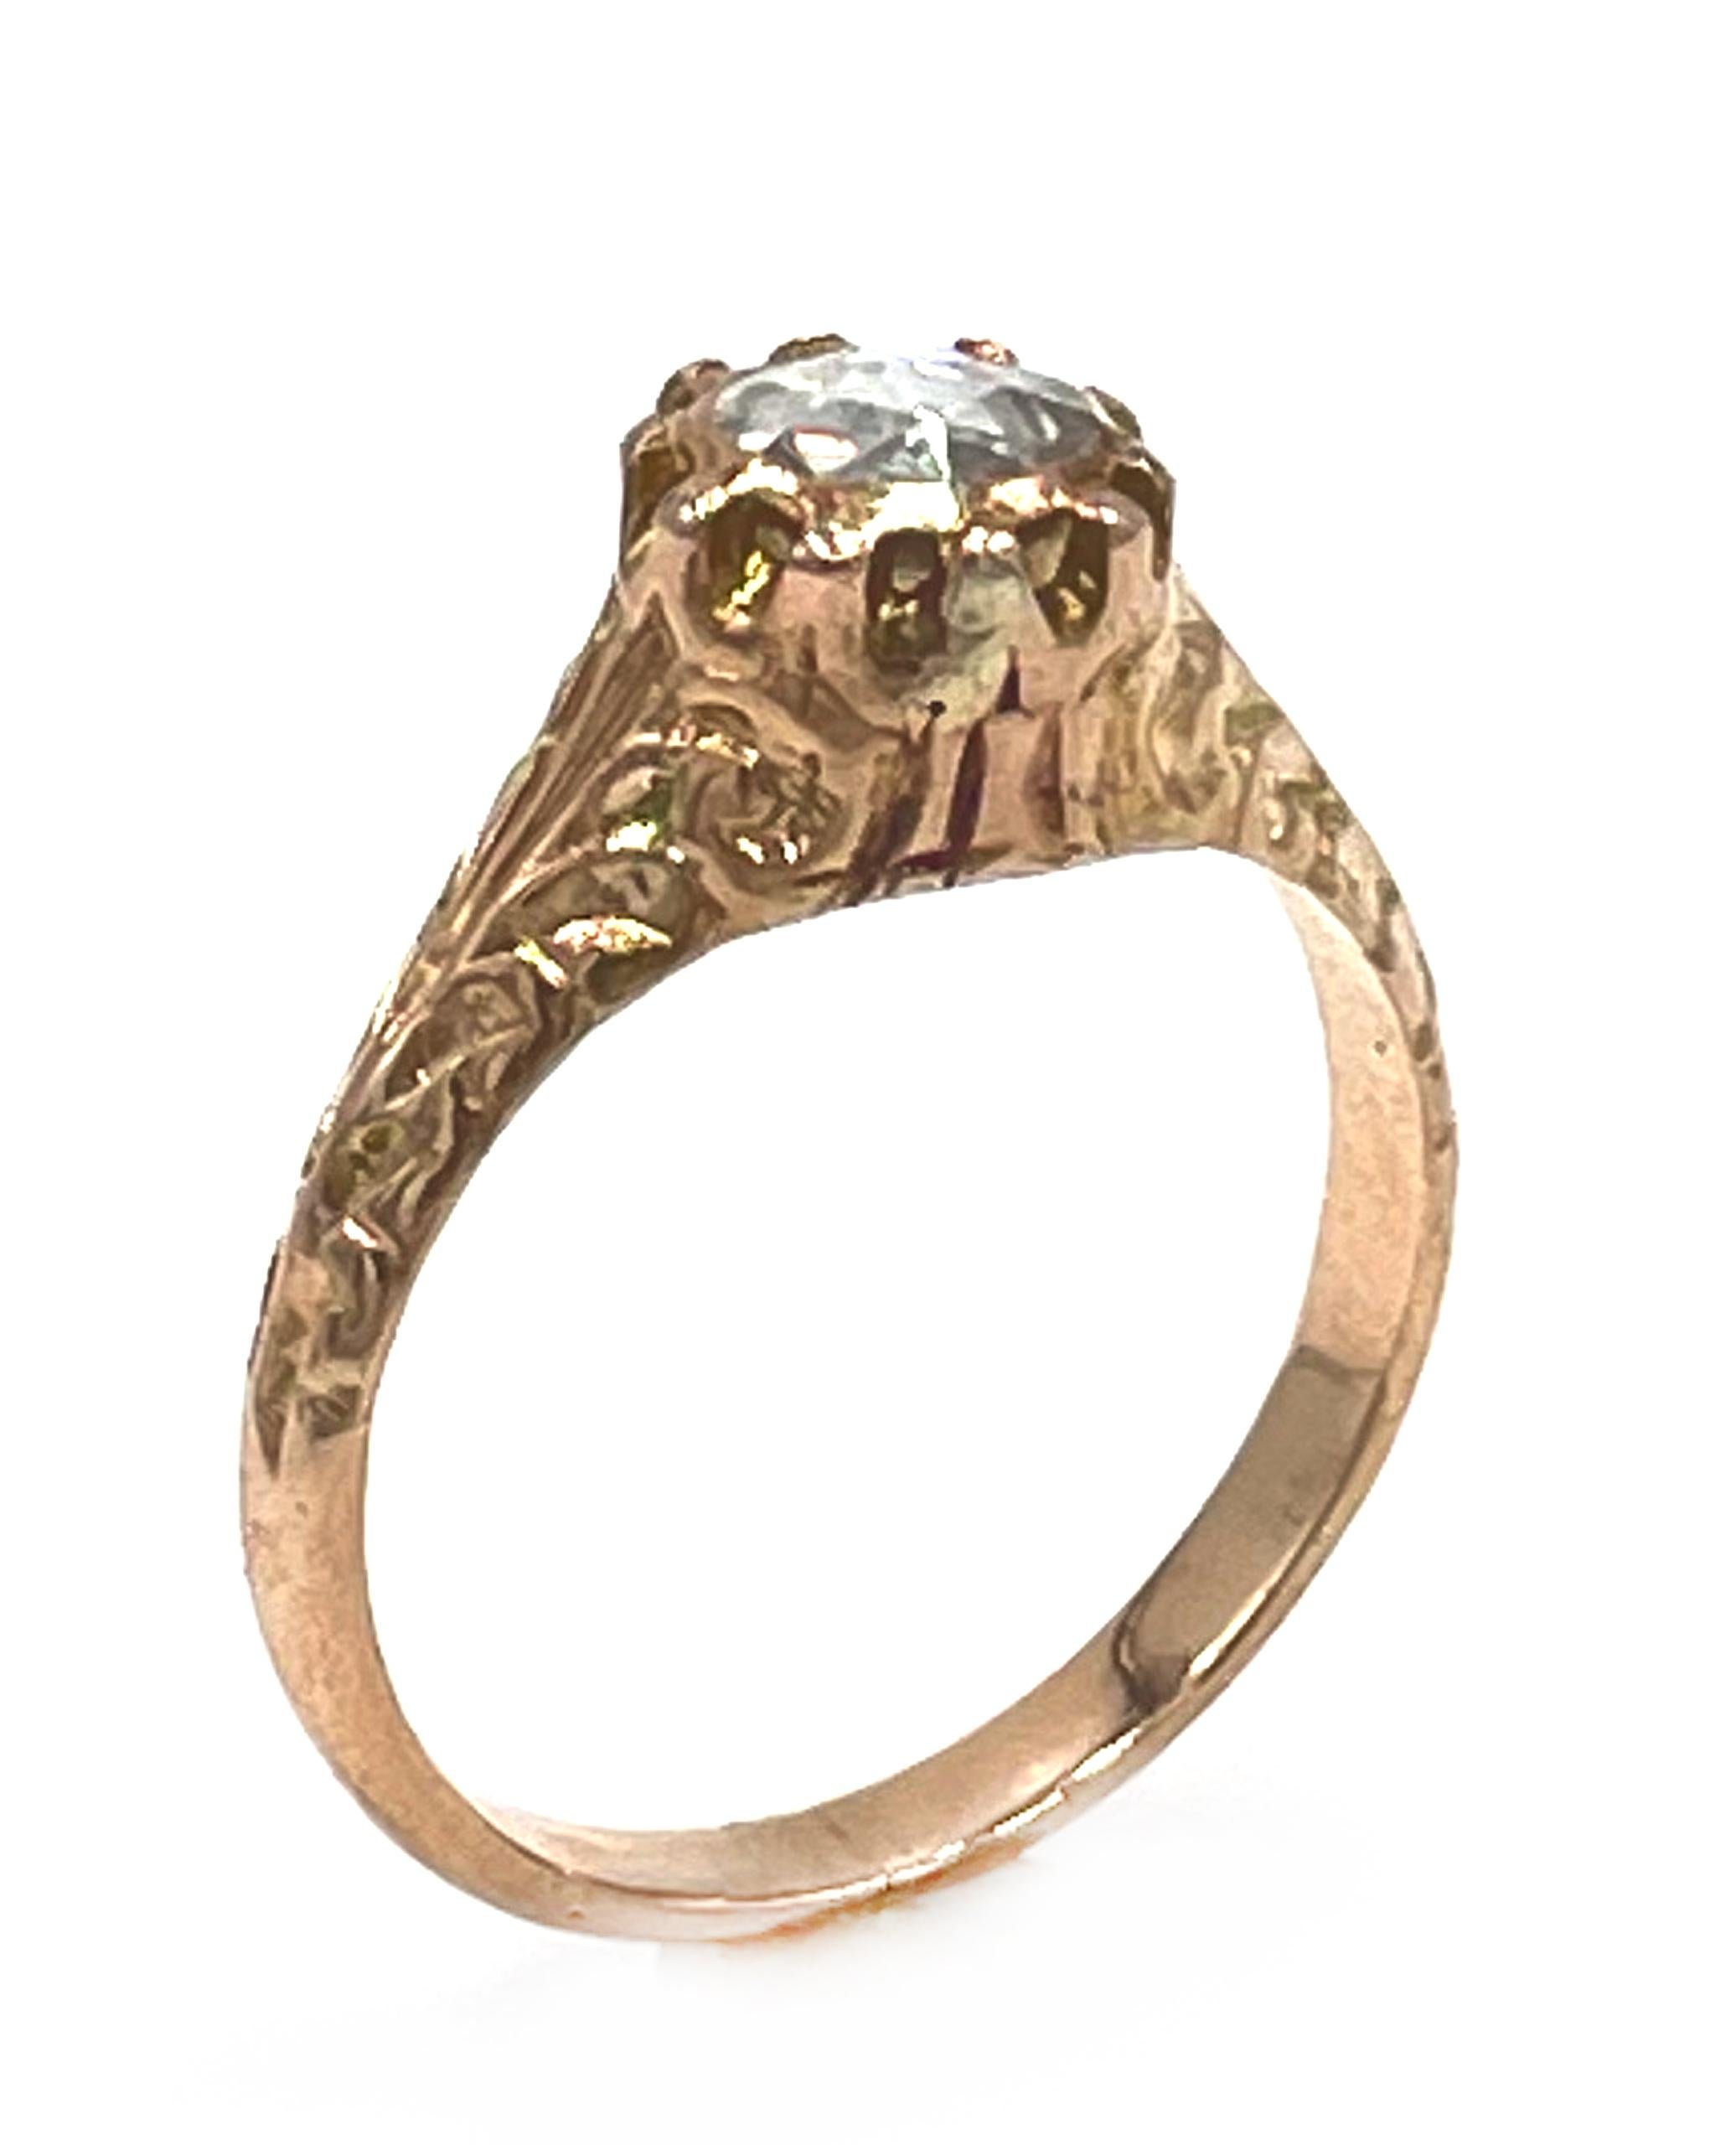 Rose gold antique Georgian style solitaire ring with hand engraving.  The ring features in the center one rose cut salt and pepper diamond weighing approximately 0.55 carats.

* Finger size 6.75